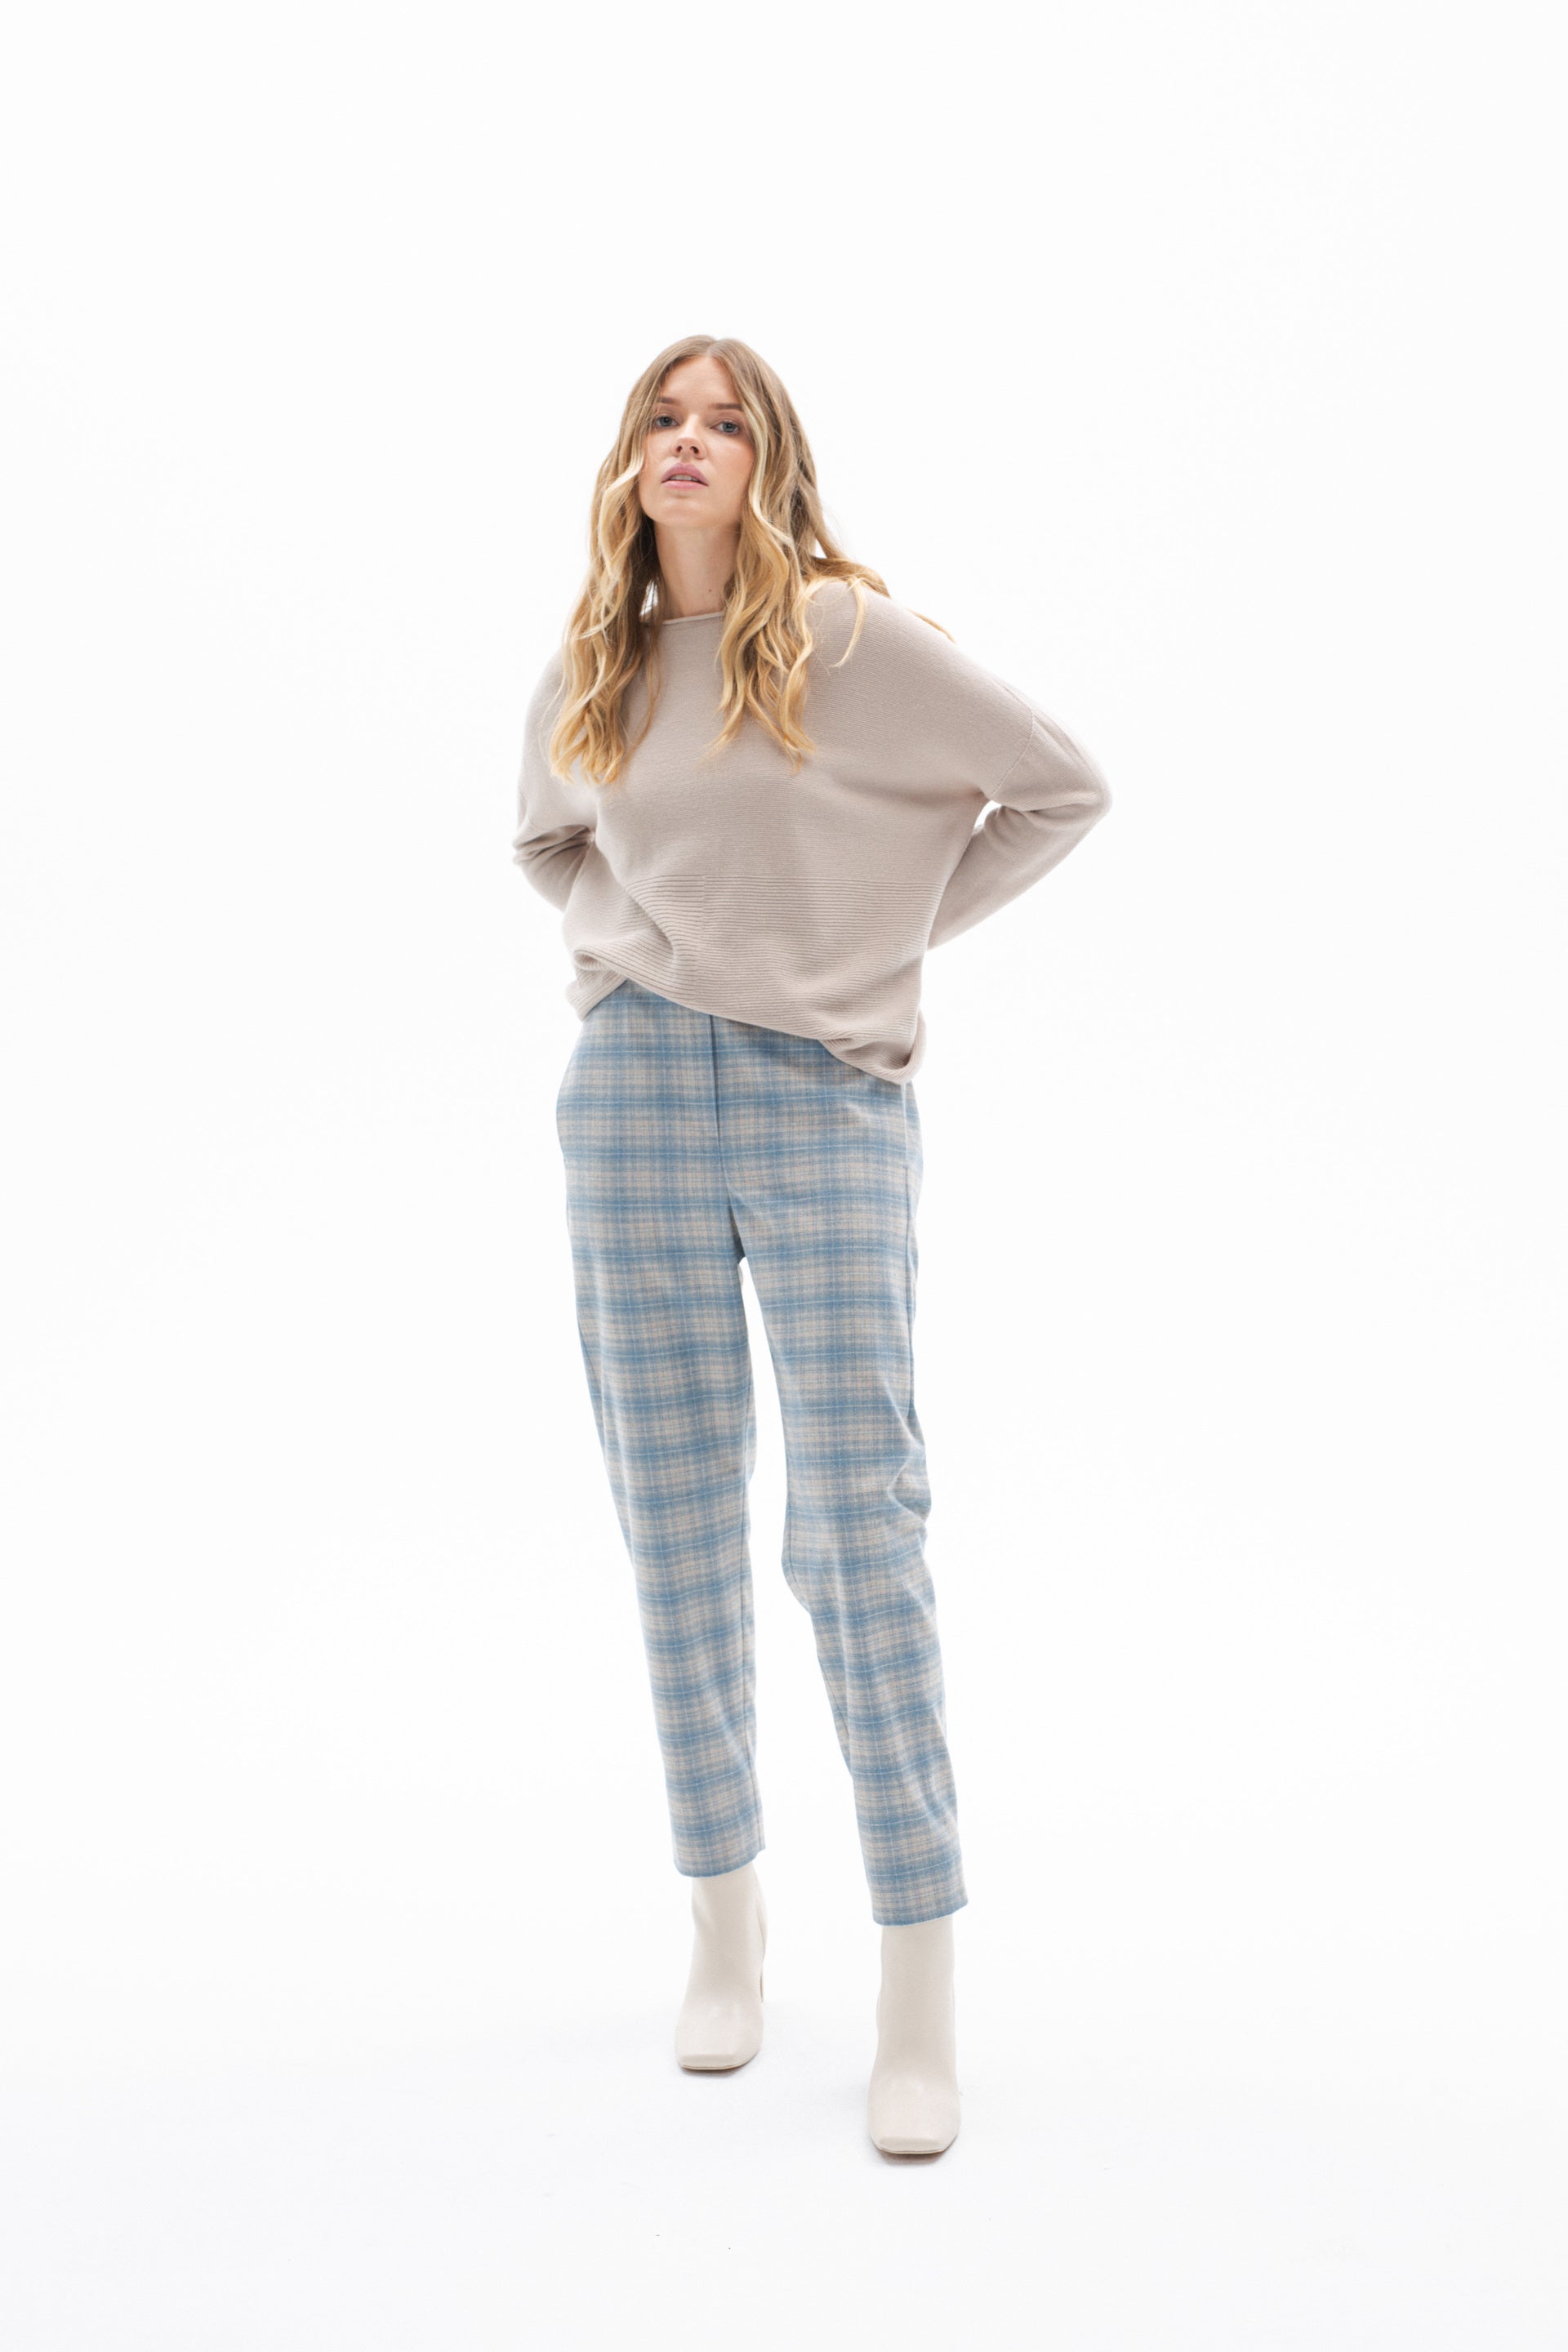 SKY BLUE PLEAT FRONT TROUSERS IN CHECKS